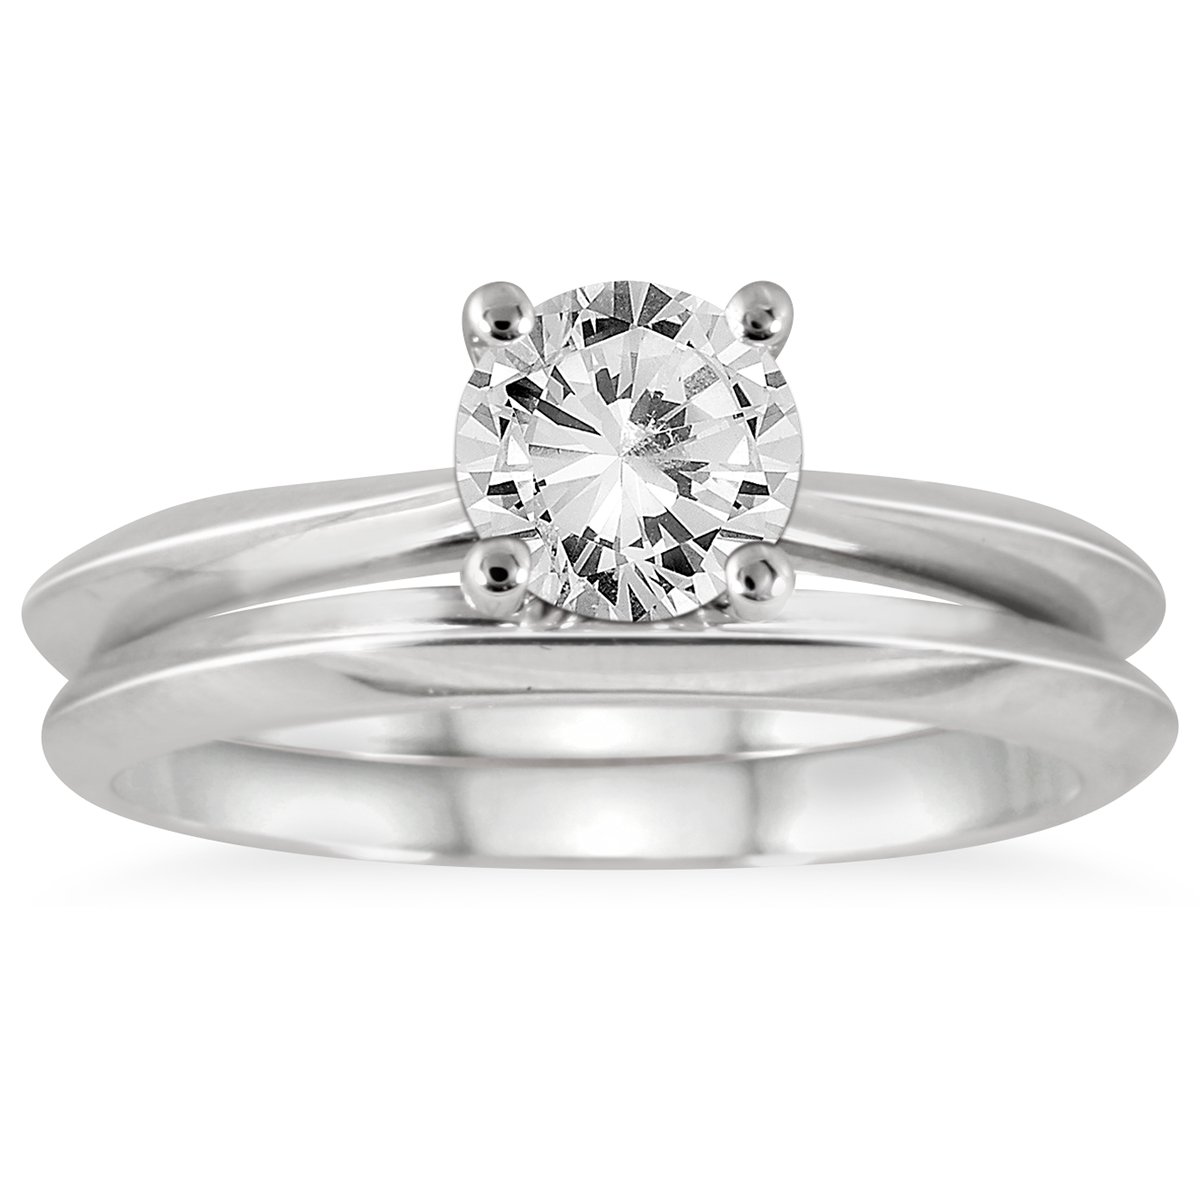 Image of AGS Certified 1 Carat Knife Edge Diamond Bridal Solitaire Set in 14K White Gold (H-I Color I1-I2 Clarity)